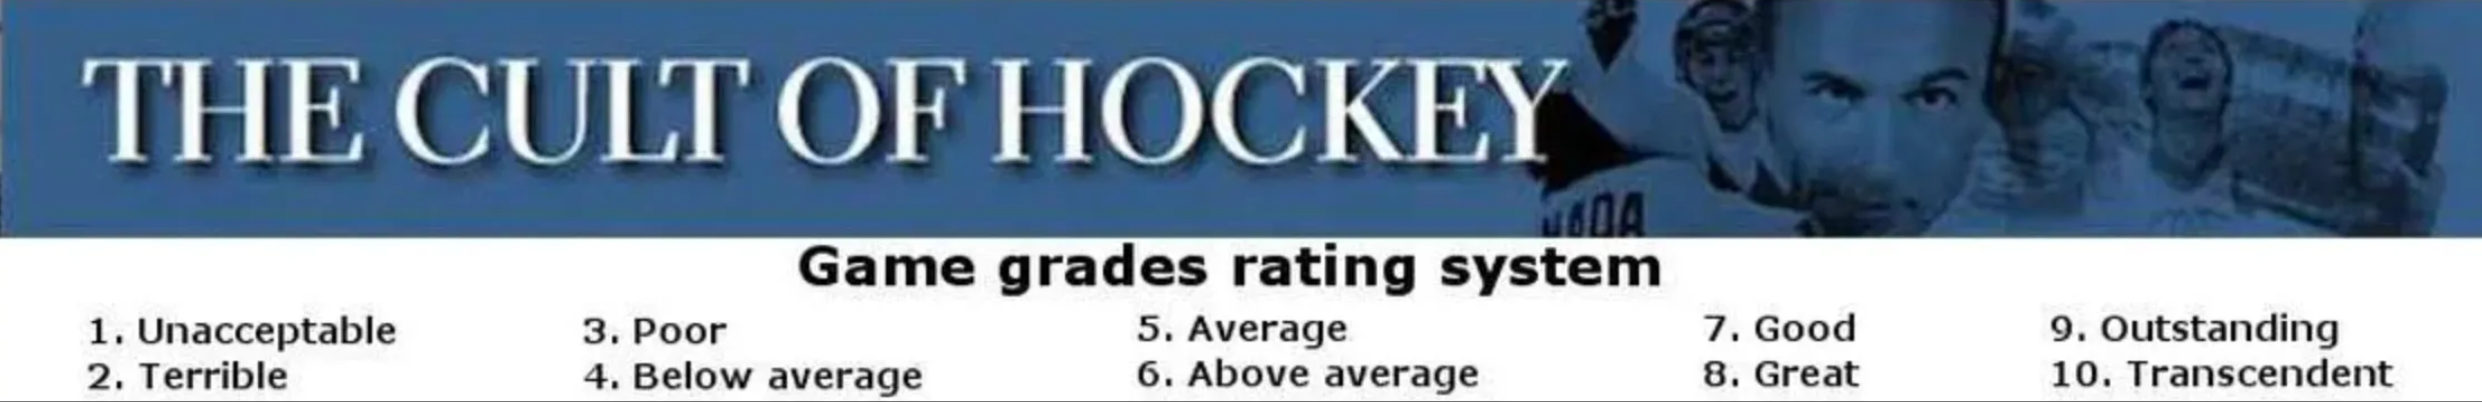 The Cult of Hockey game ranks player grades